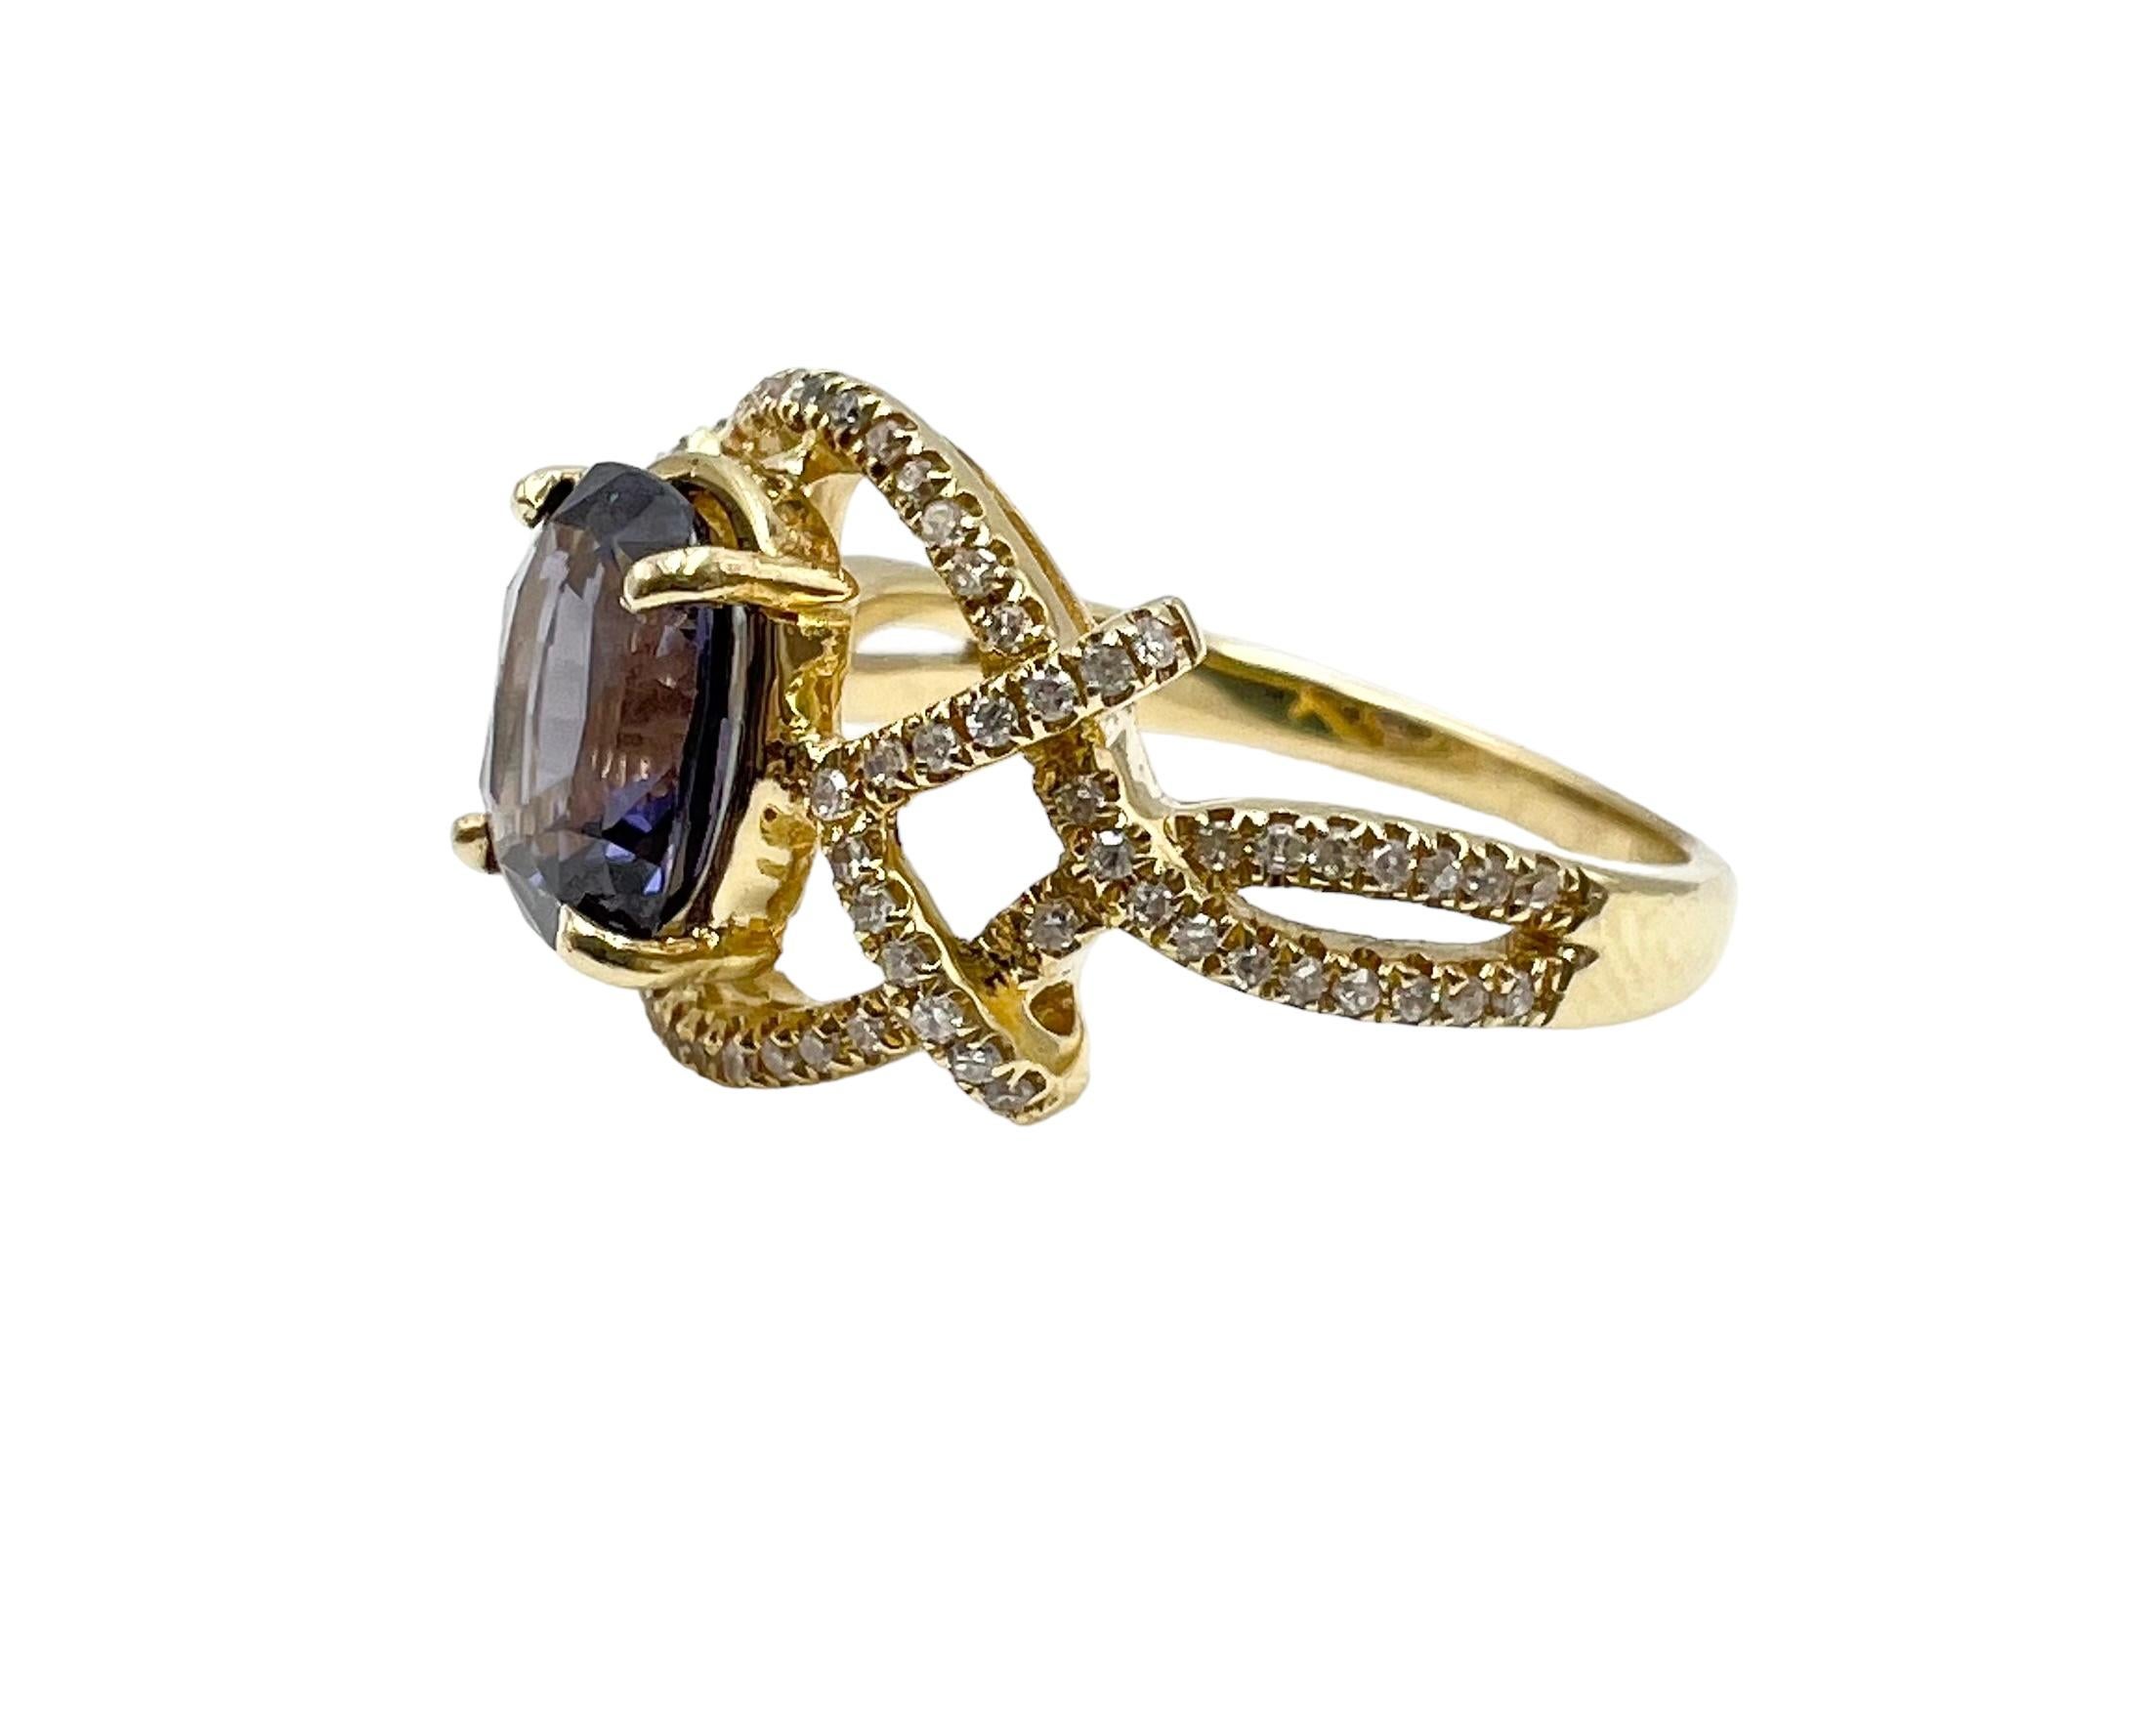 This is a beautiful hand-crafted ring with an elegant purple spinel and 90 hand cut diamonds. These Diamonds are of a SI1-SI2 grade. This ring is perfect for showing off your wonderful style at parties!

Ring Size: 8.25

Cumulative weight of